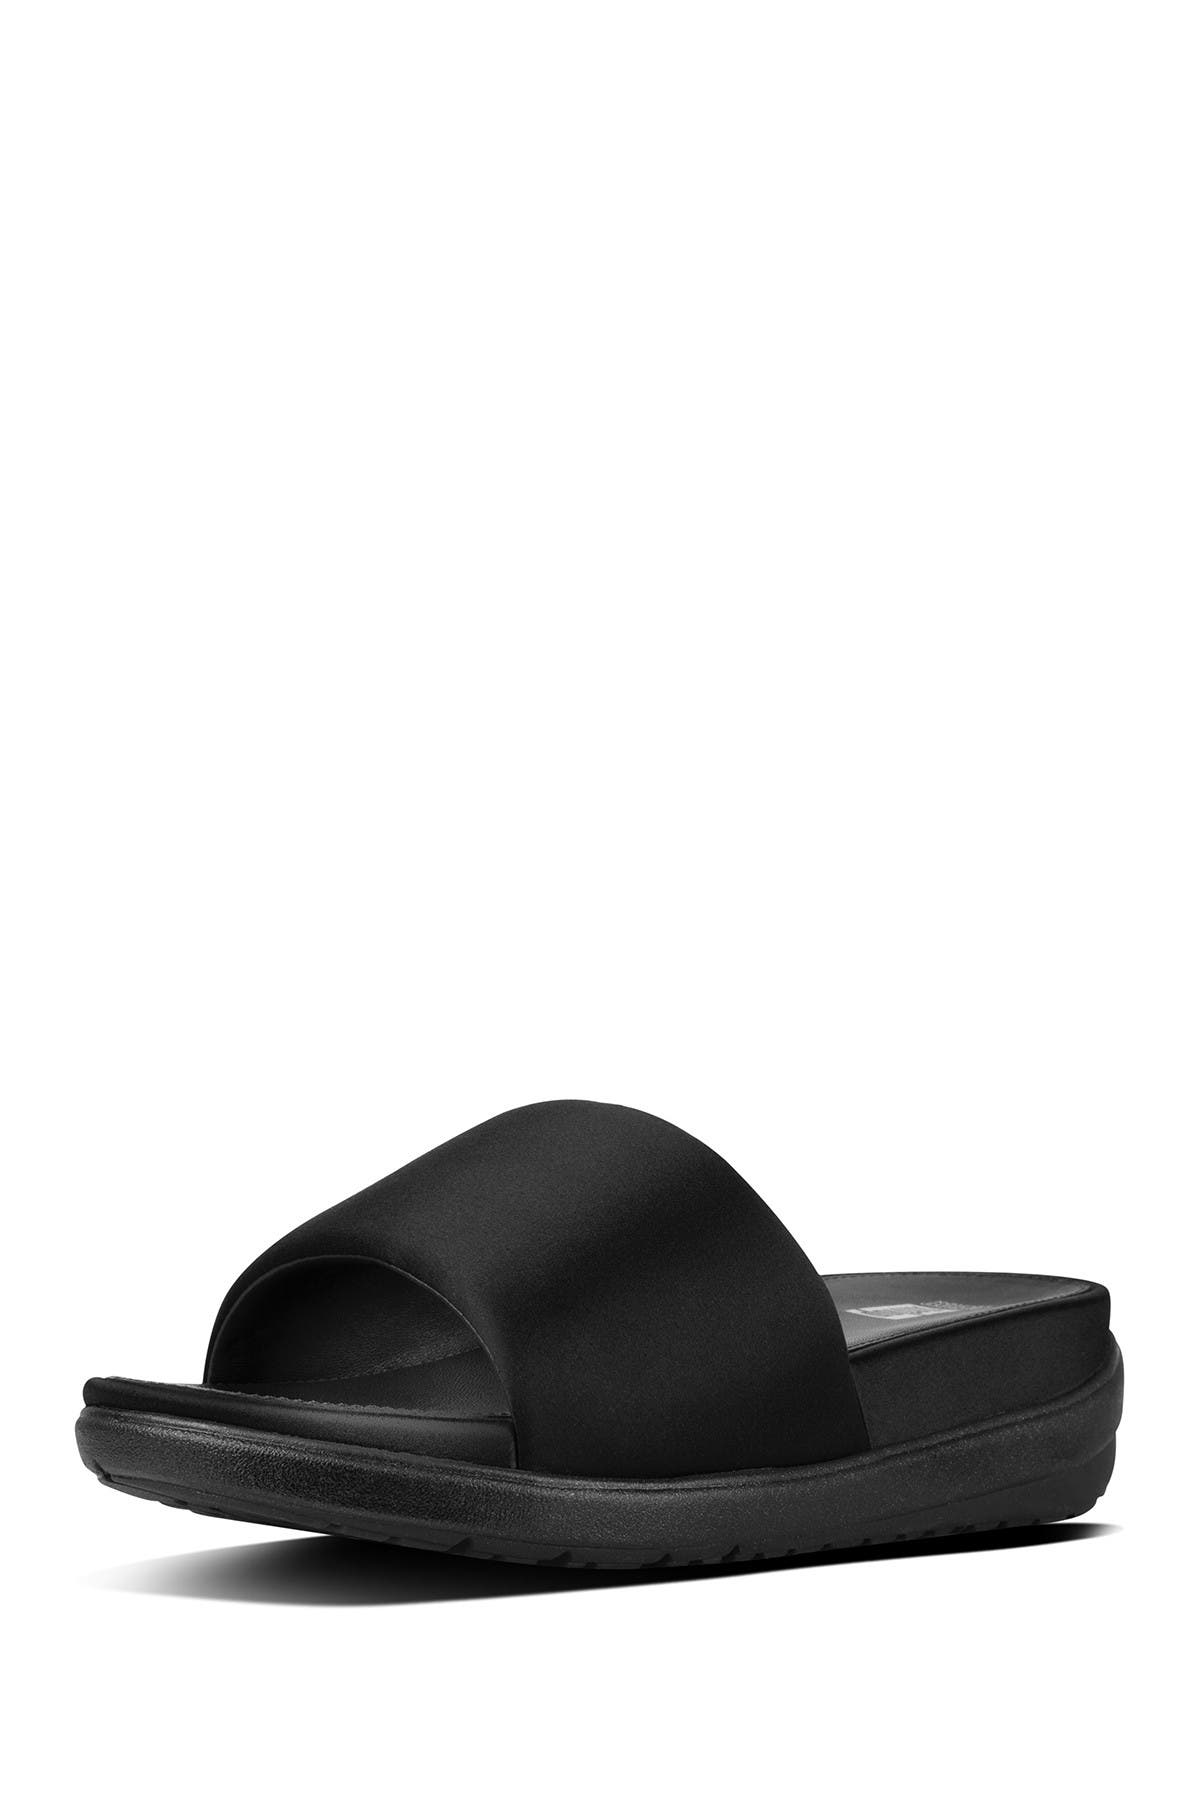 fitflop loosh luxe